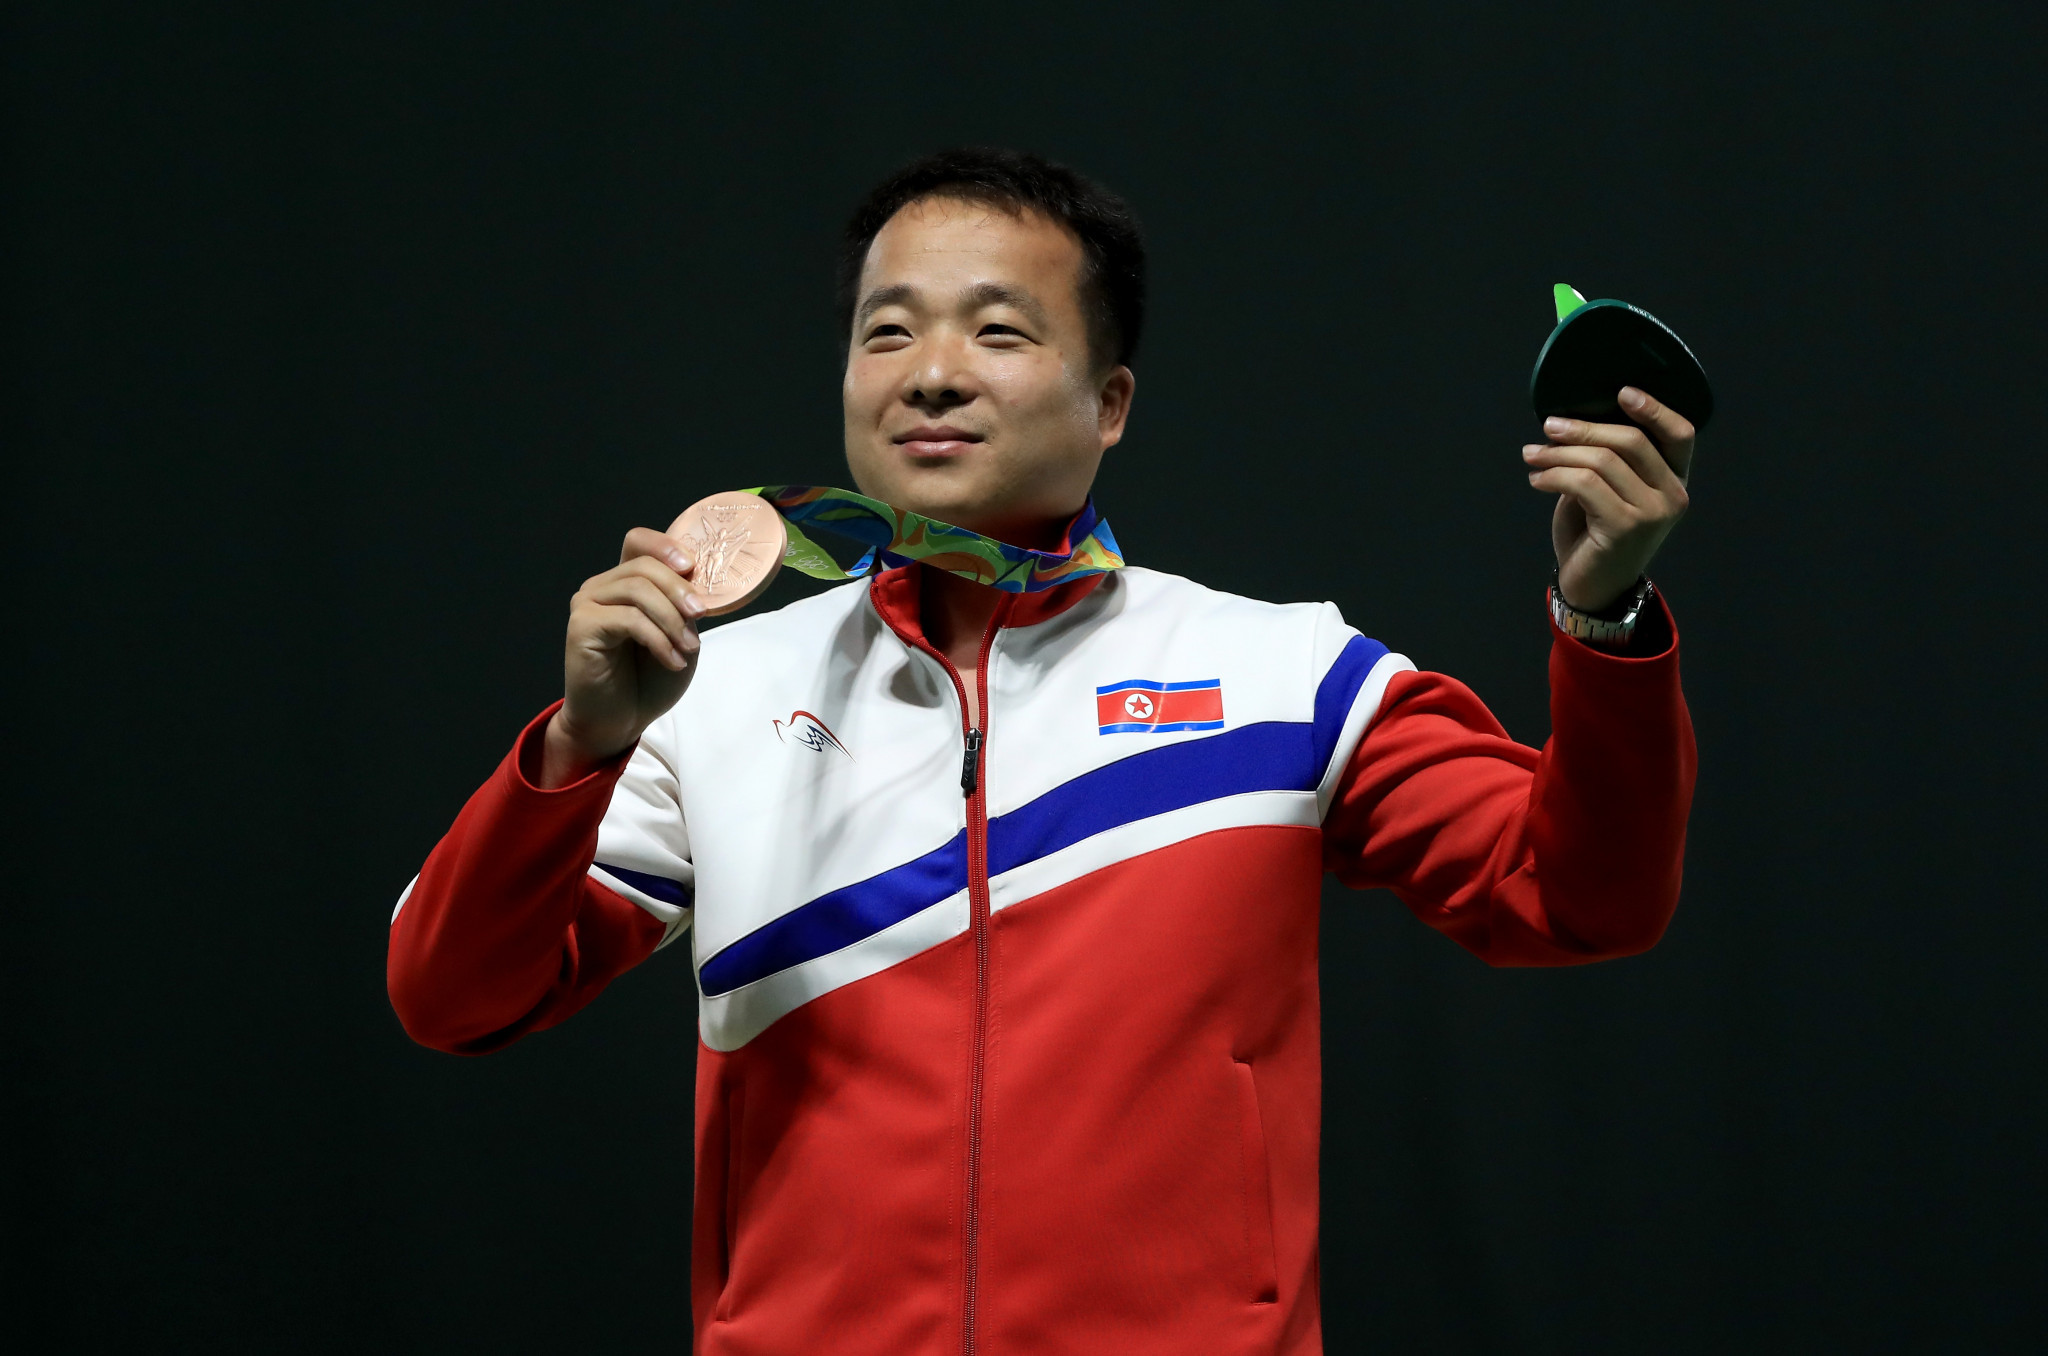 North Korea's Olympic bronze medallist Kim Song Guk struck gold in Doha ©Getty Images